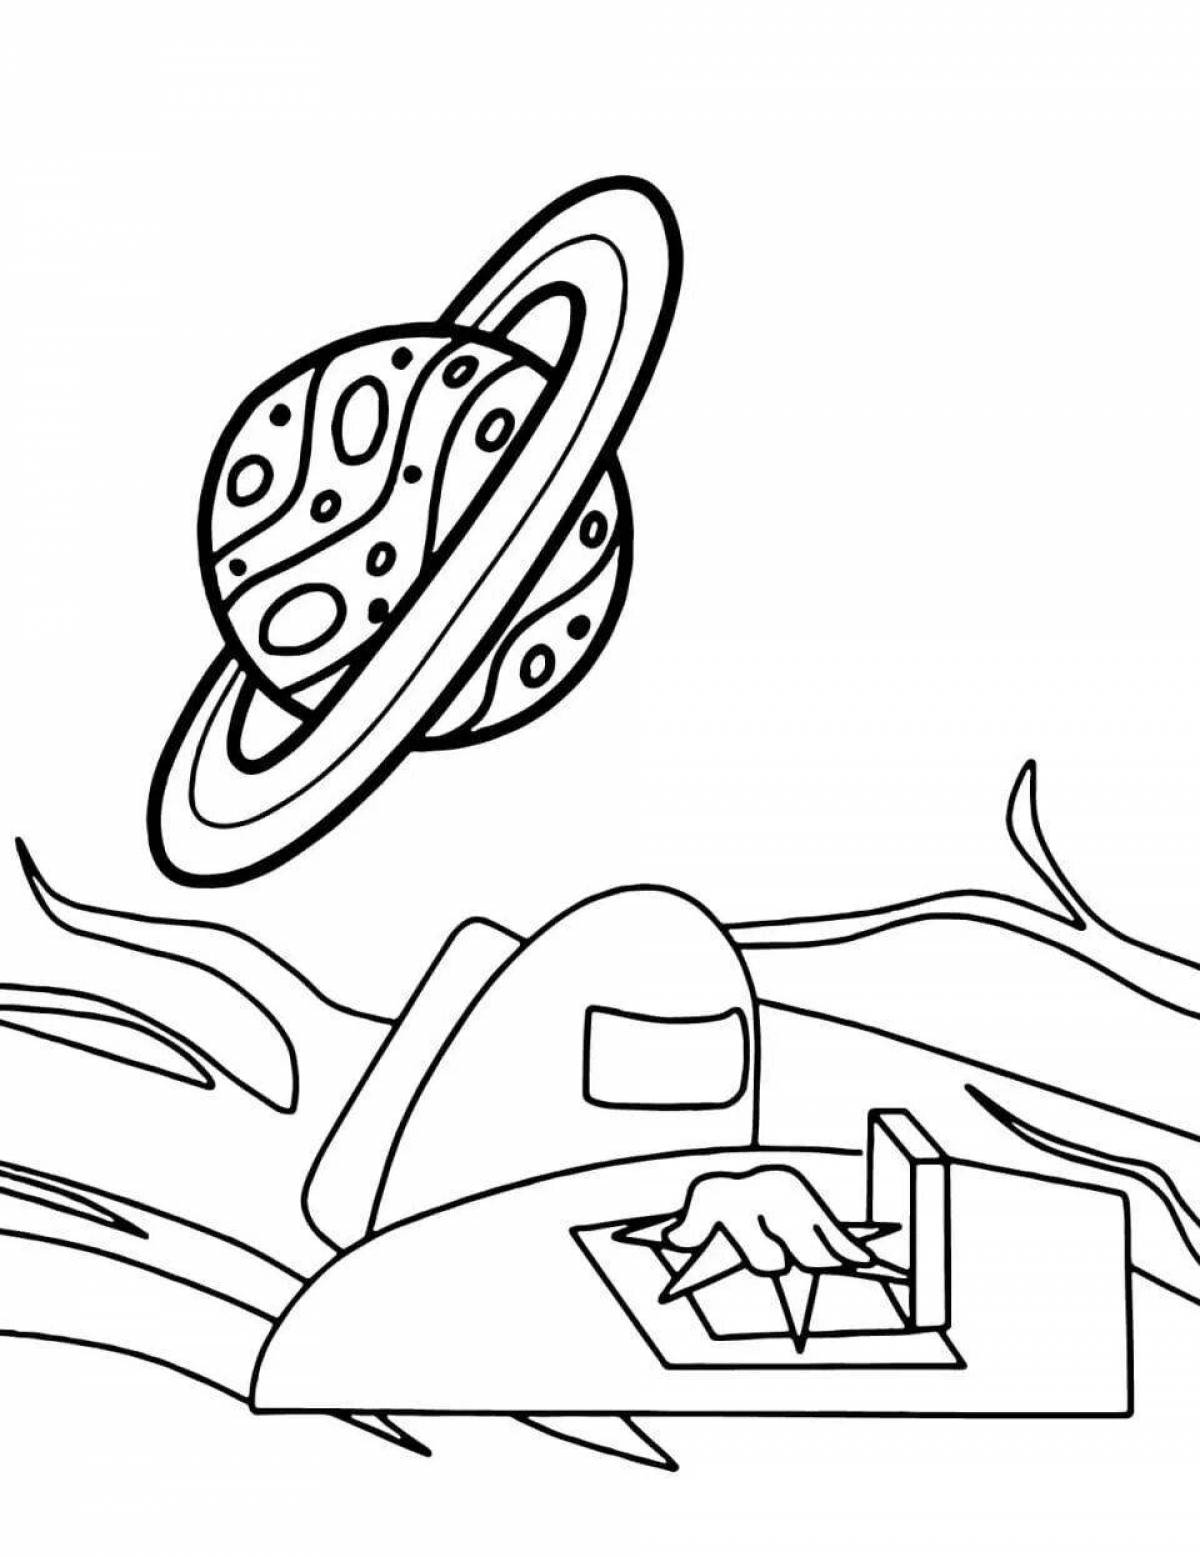 Exciting spaceship coloring page among us